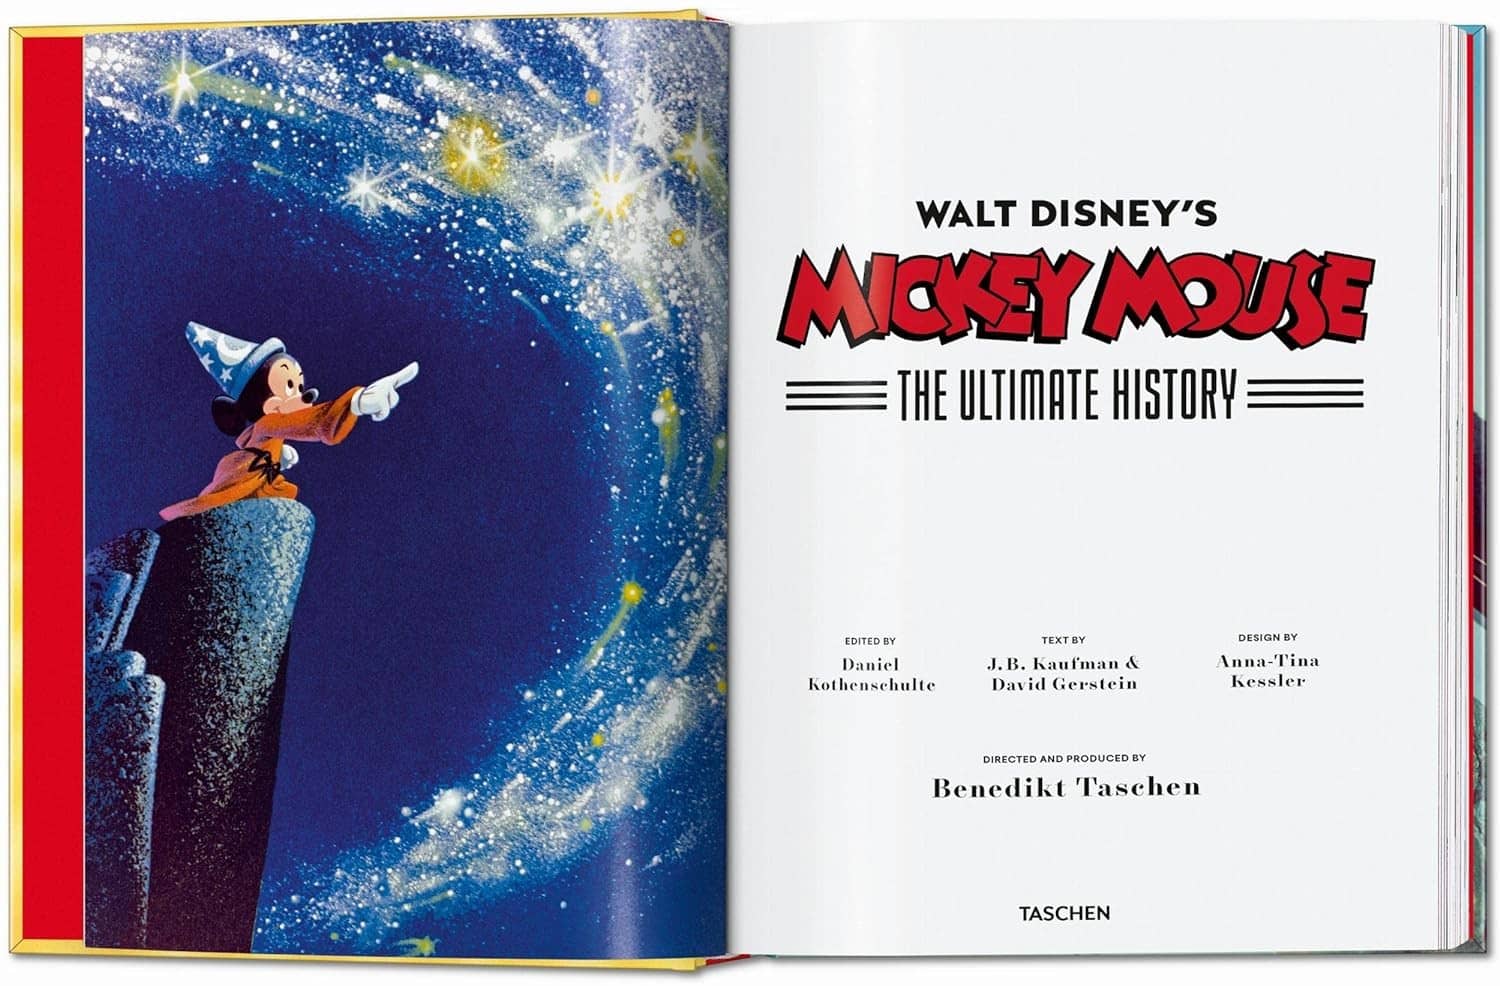 17421-walt-disney-s-mickey-mouse-the-ultimate-history-81jpun0hsol-sl1500